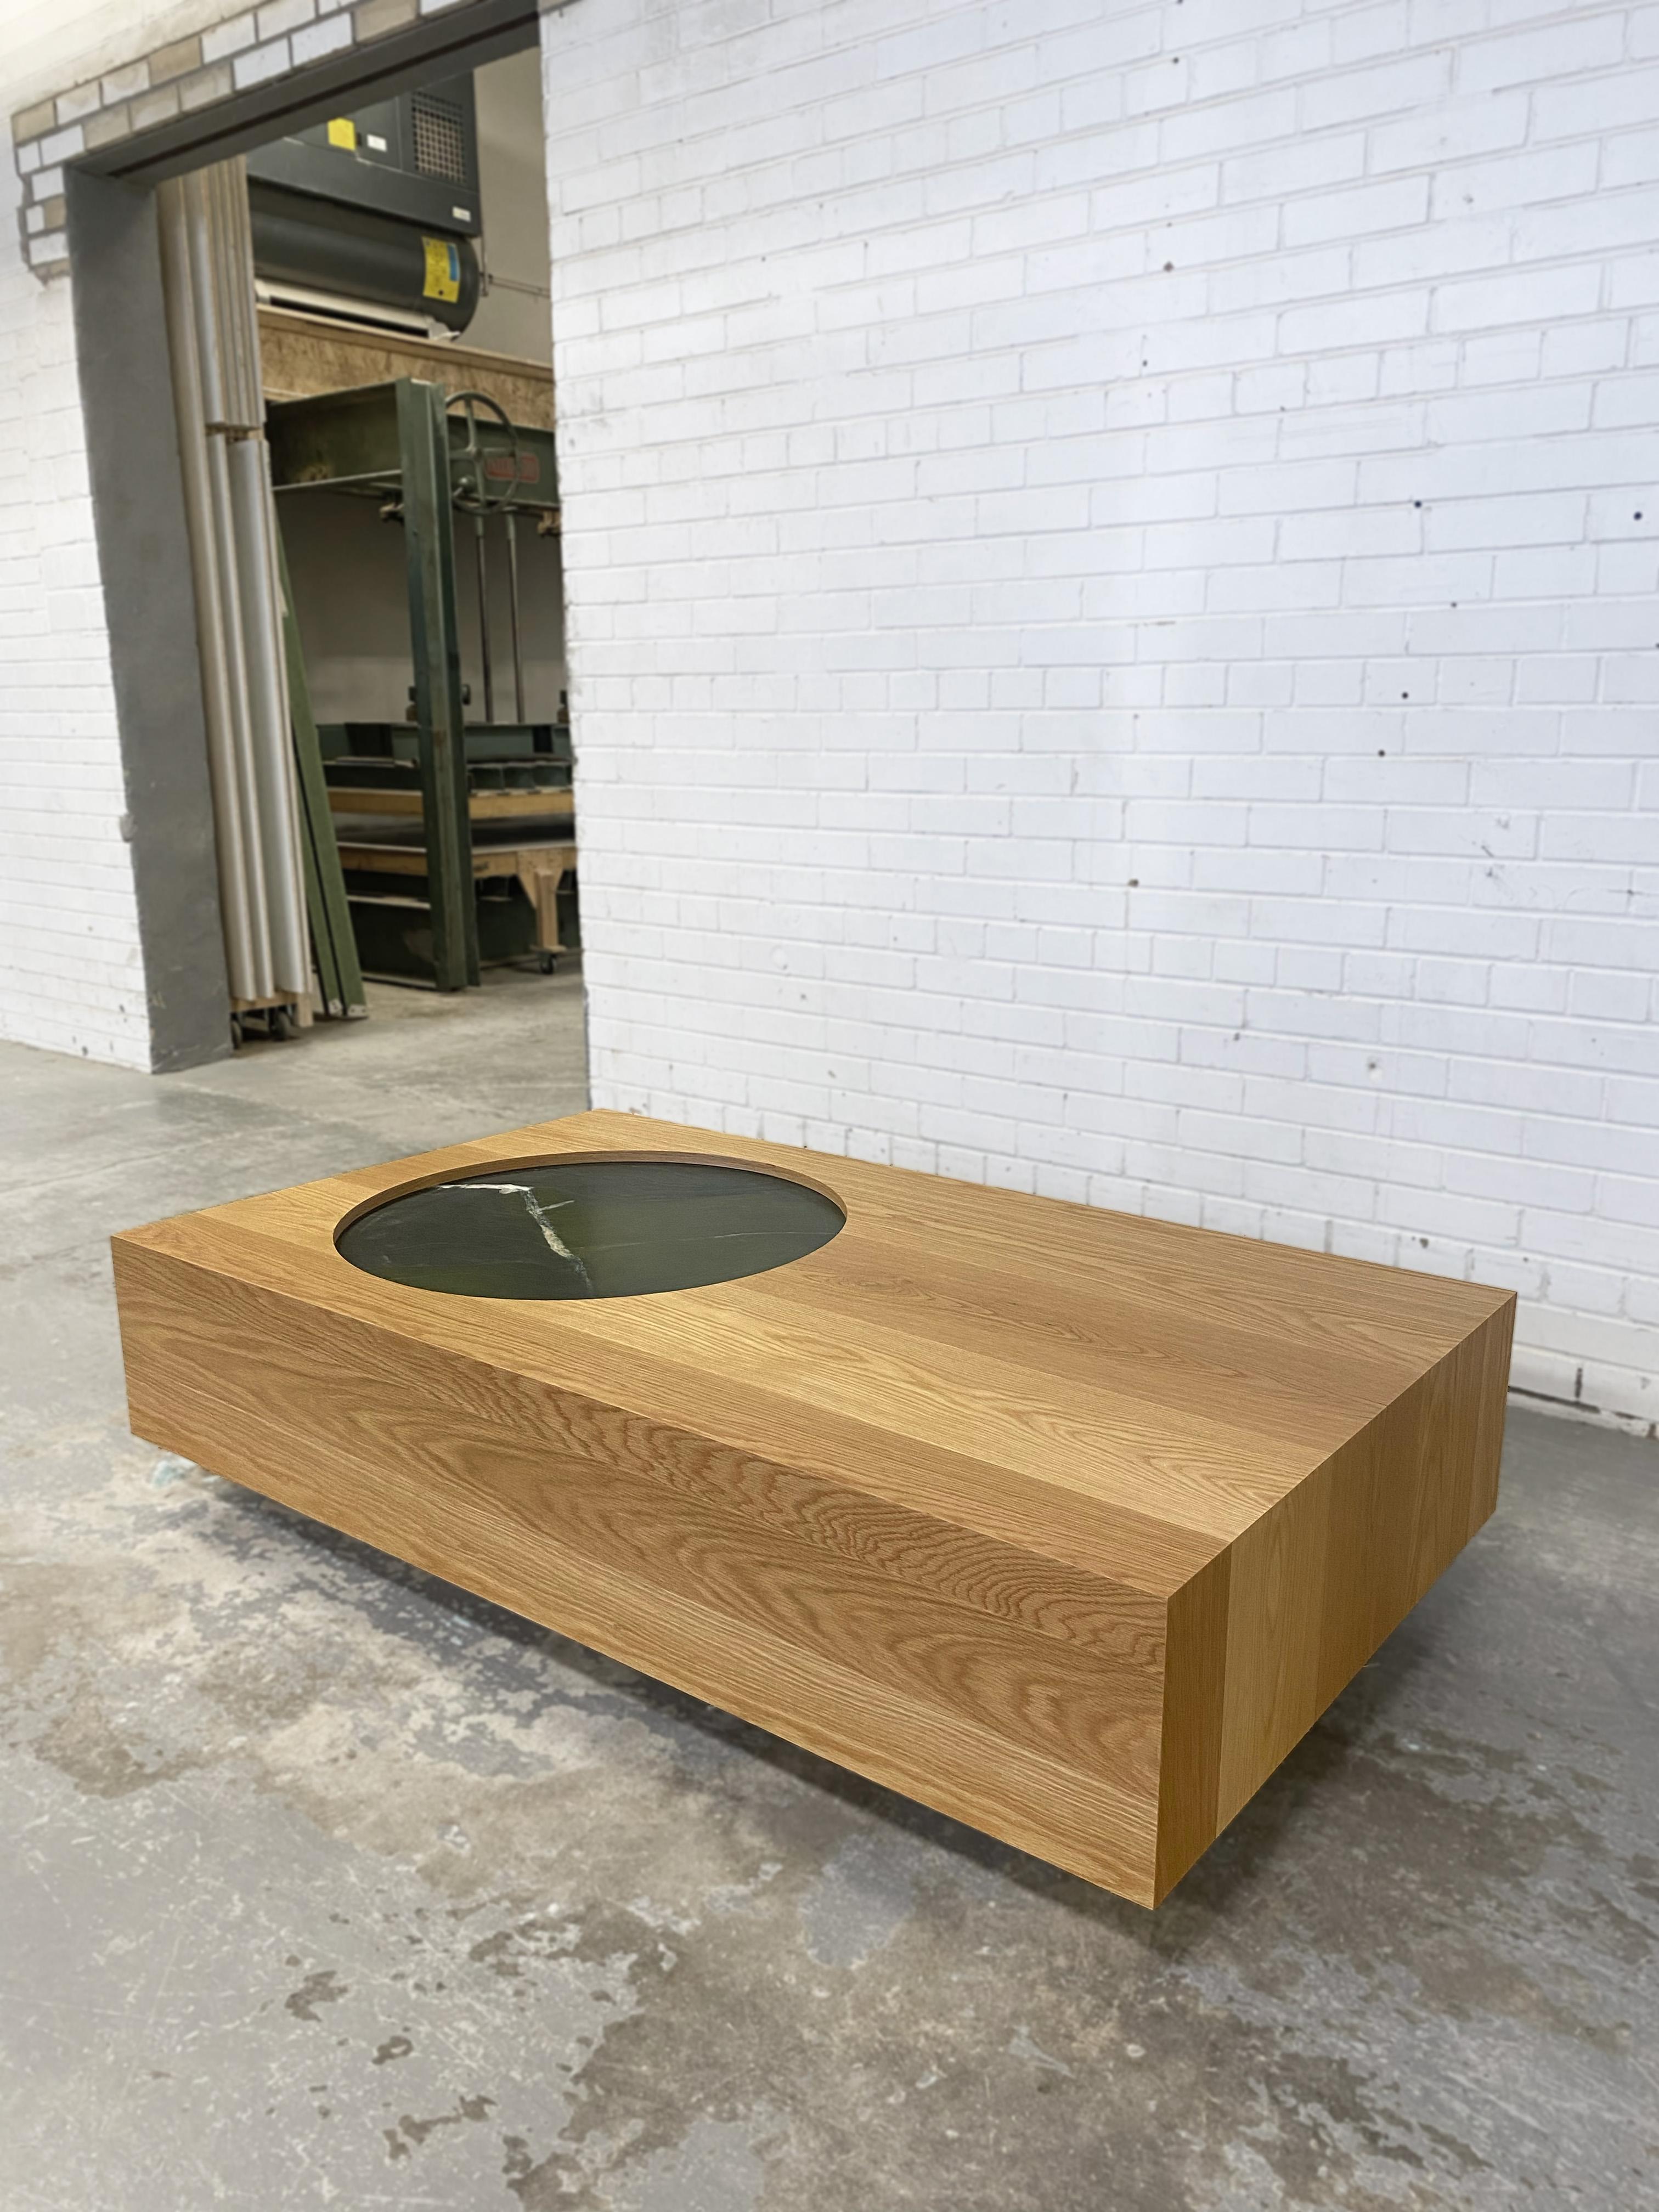 This listing is for our Luna Coffee Table customized with an Avocatus Quartzite integrated tray, available NOW while quantities last (we have one in stock as shown). If custom sizing is required, please inquire within for pricing and availability.